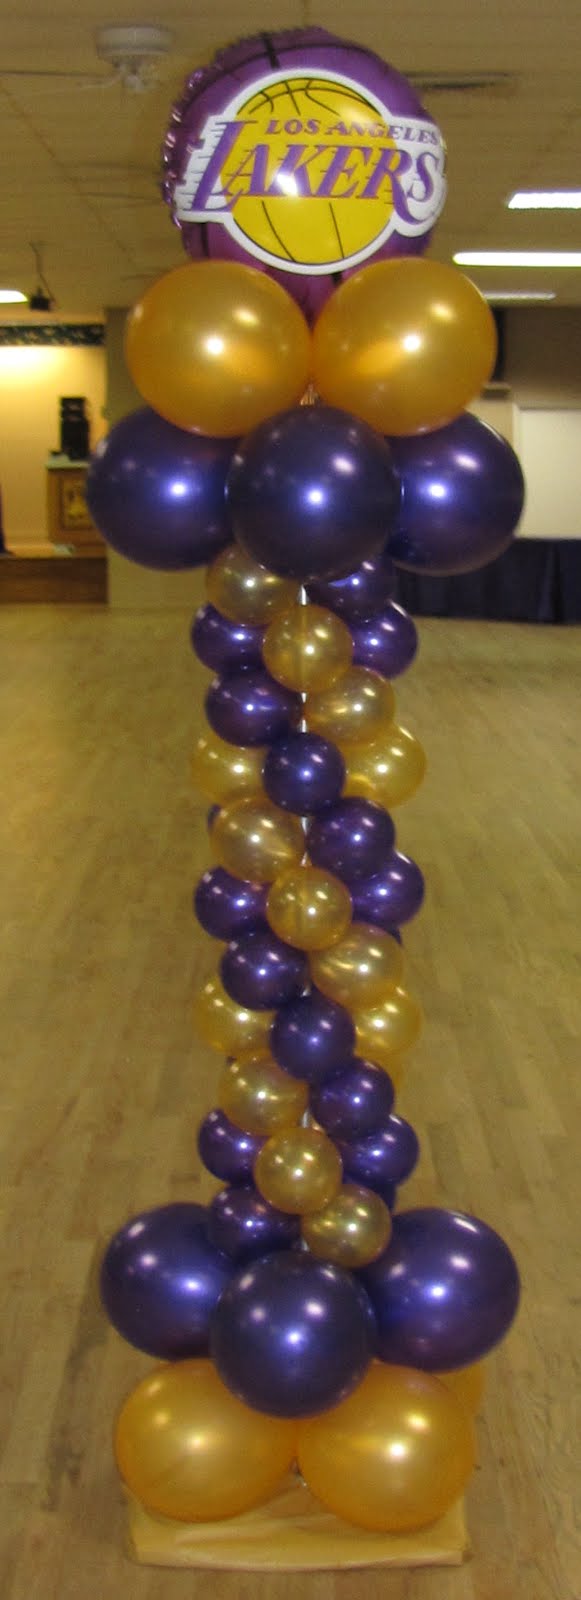  Party  People Event Decorating  Company Lakers  Birthday  